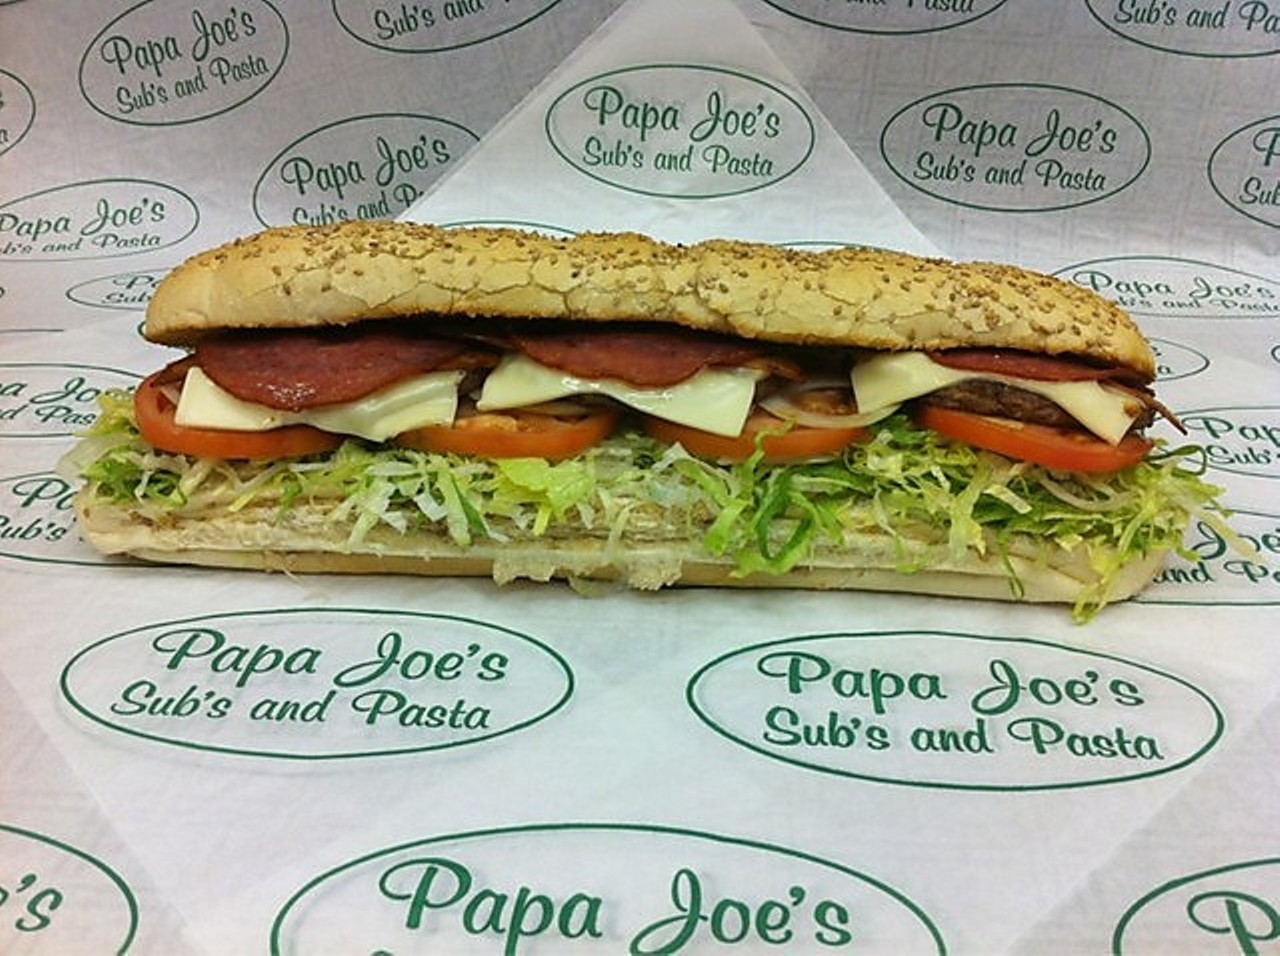 Papa Joe's Subs and Pastas is located at 564 E 200th St, Euclid.